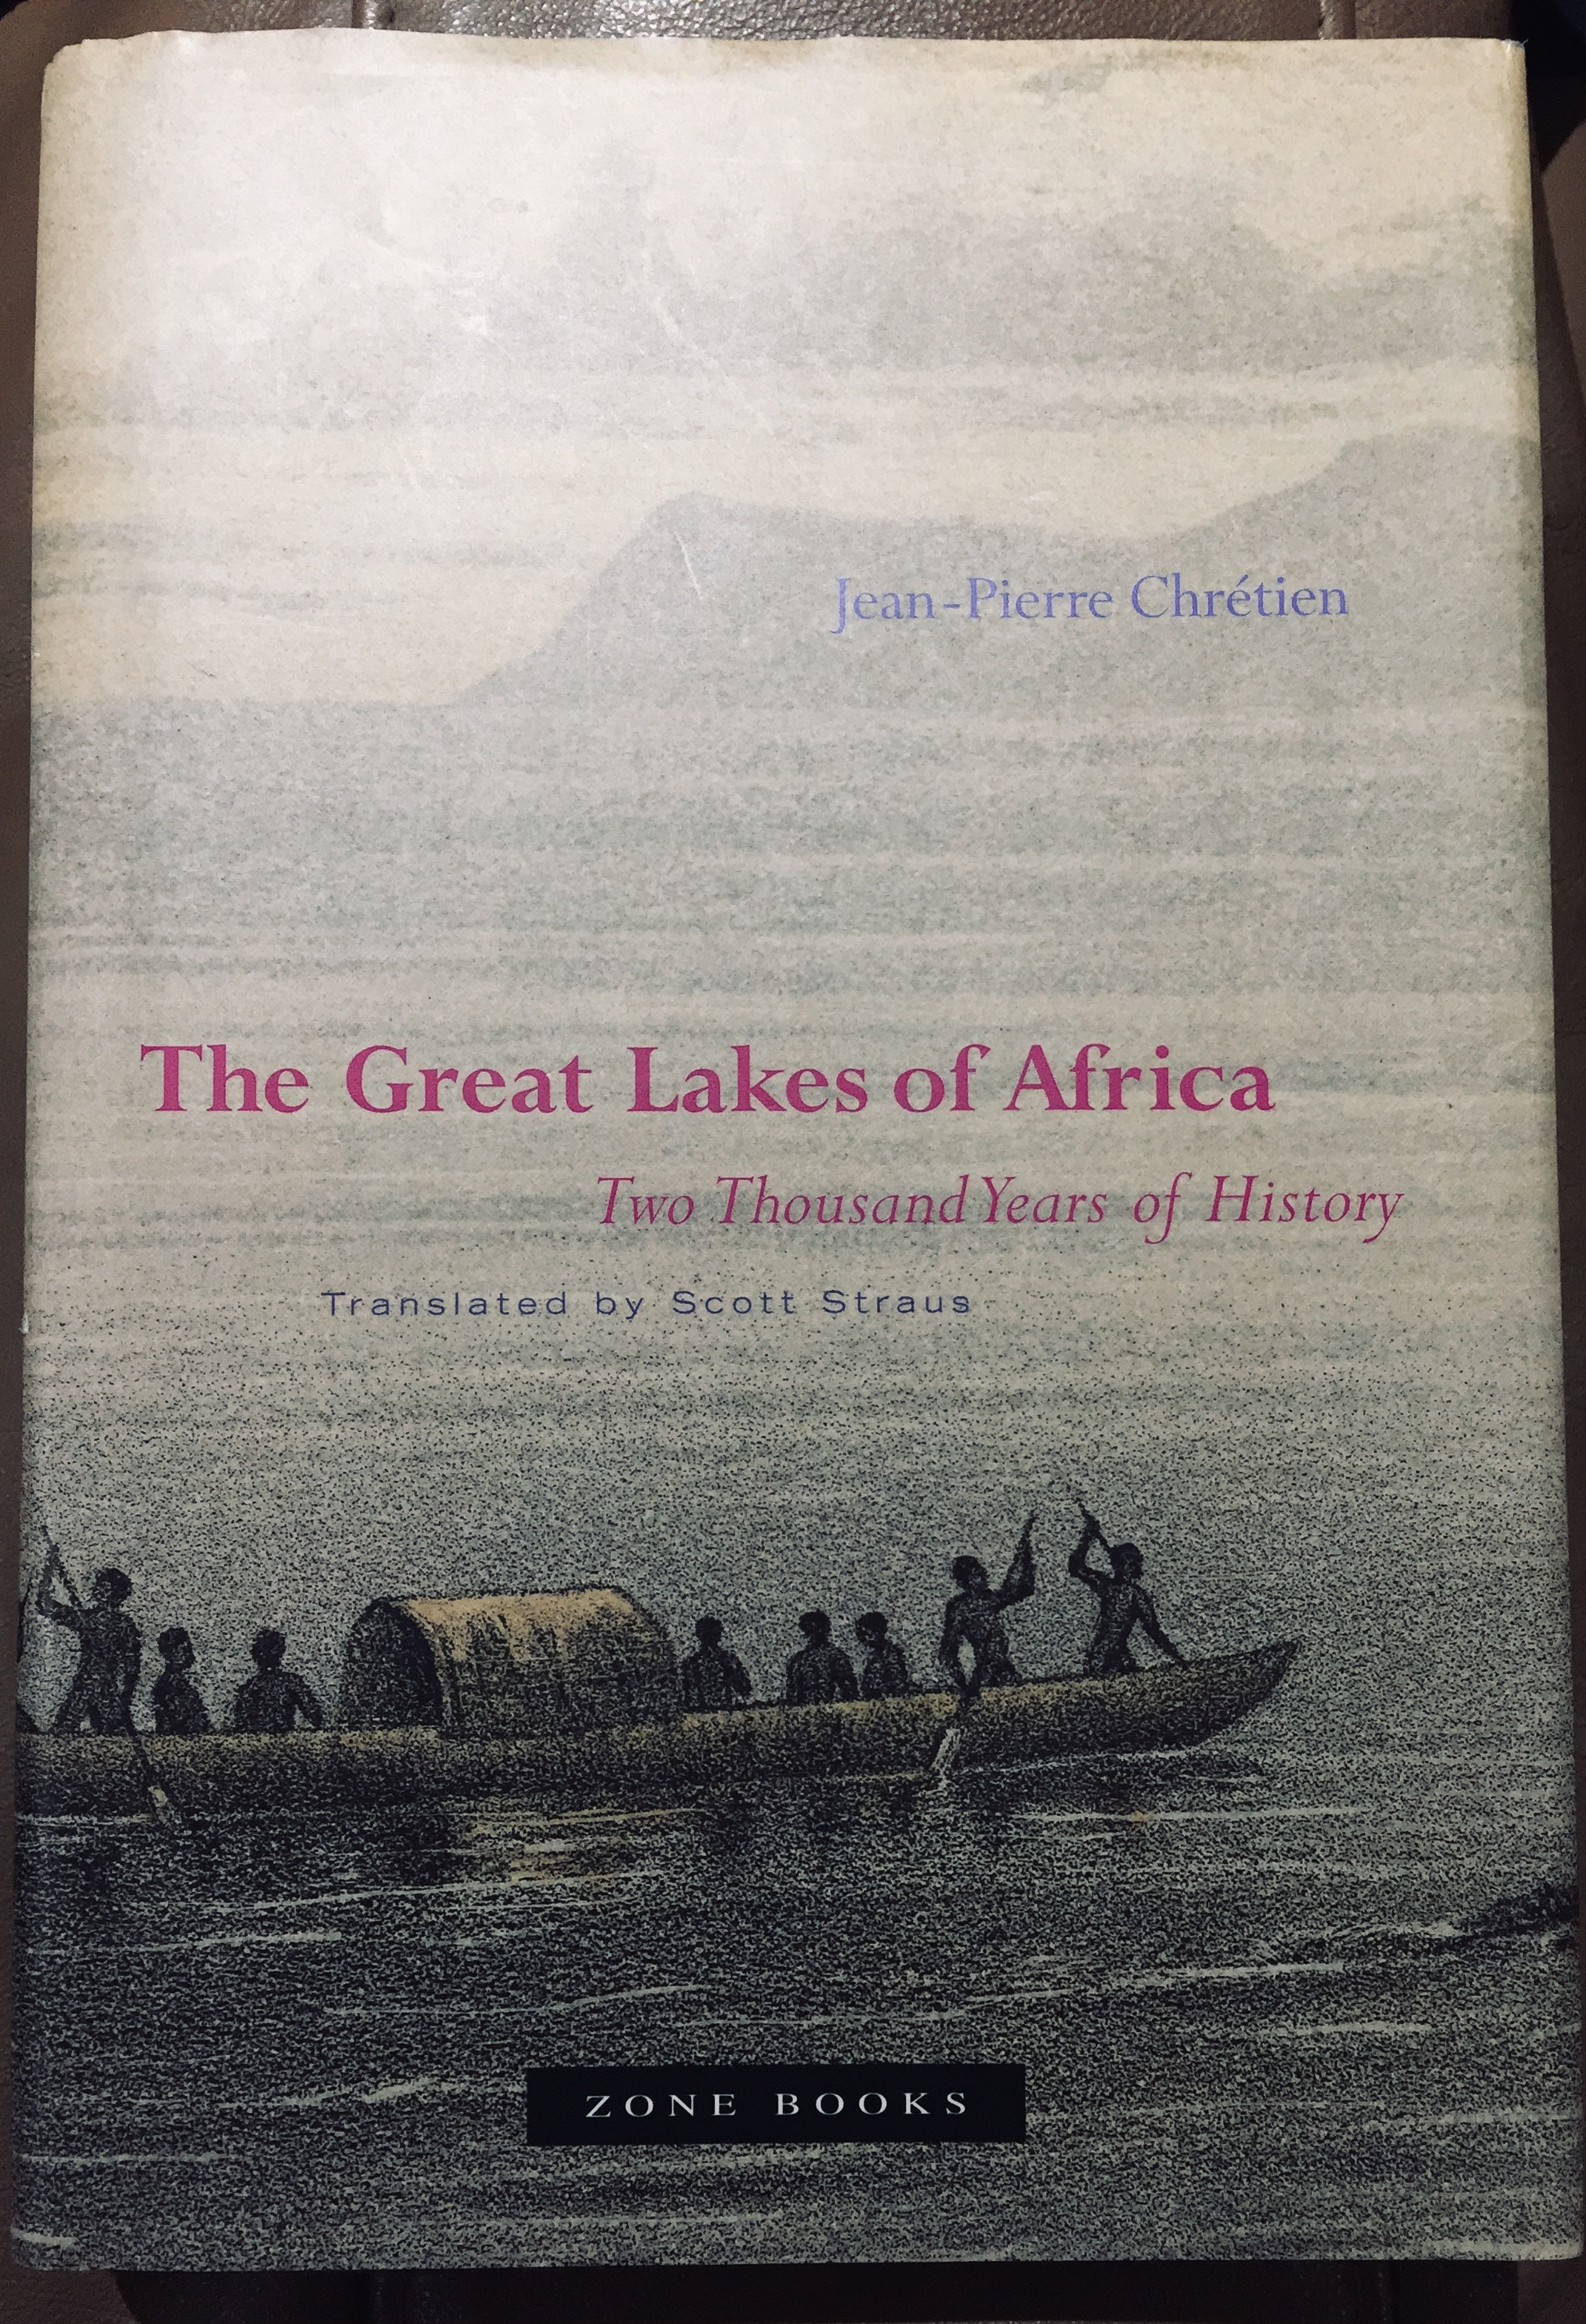 The Great Lakes of Africa: Two Thousand Years of History – By Jean-Pierre Chretien